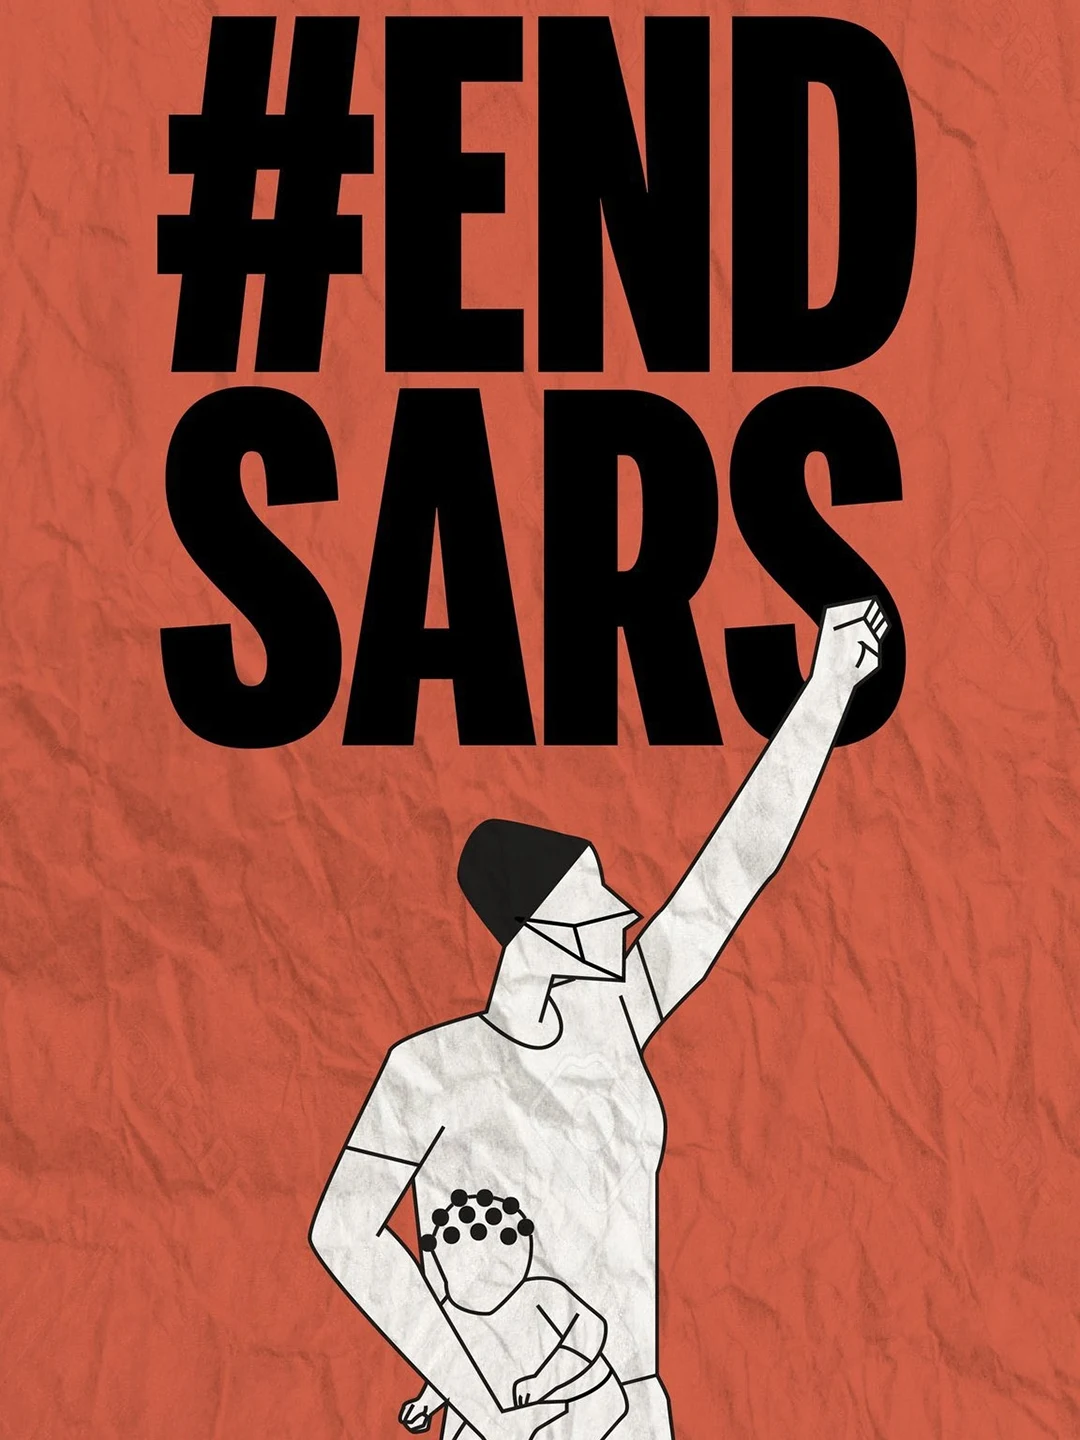 How to protect your mental health during the #ENDSARS protest.